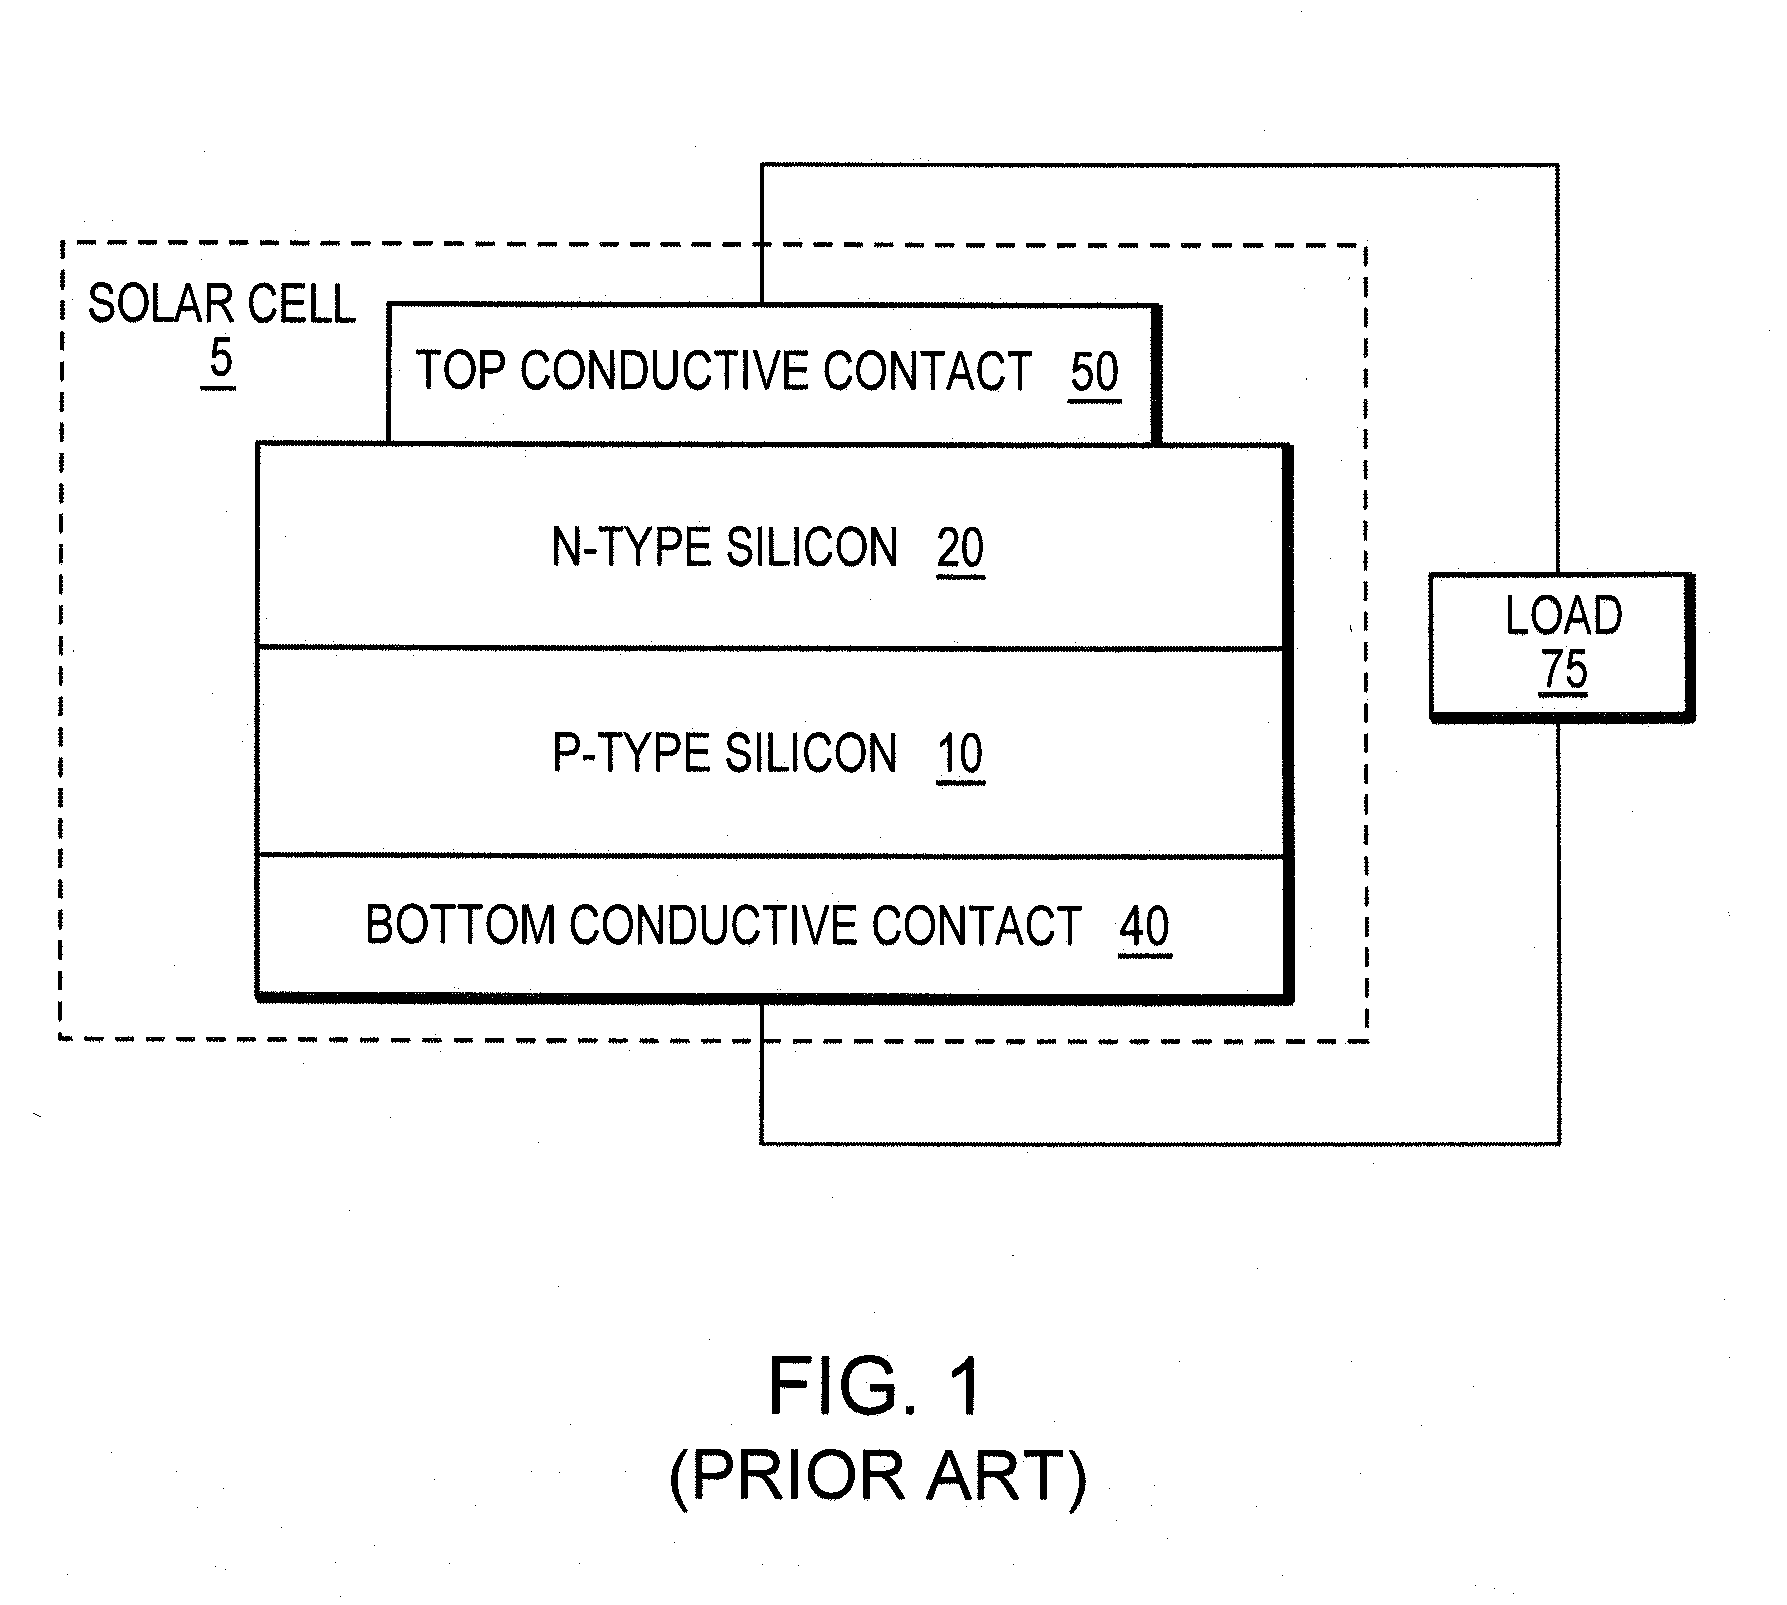 Solar cell having a high quality rear surface spin-on dielectric layer